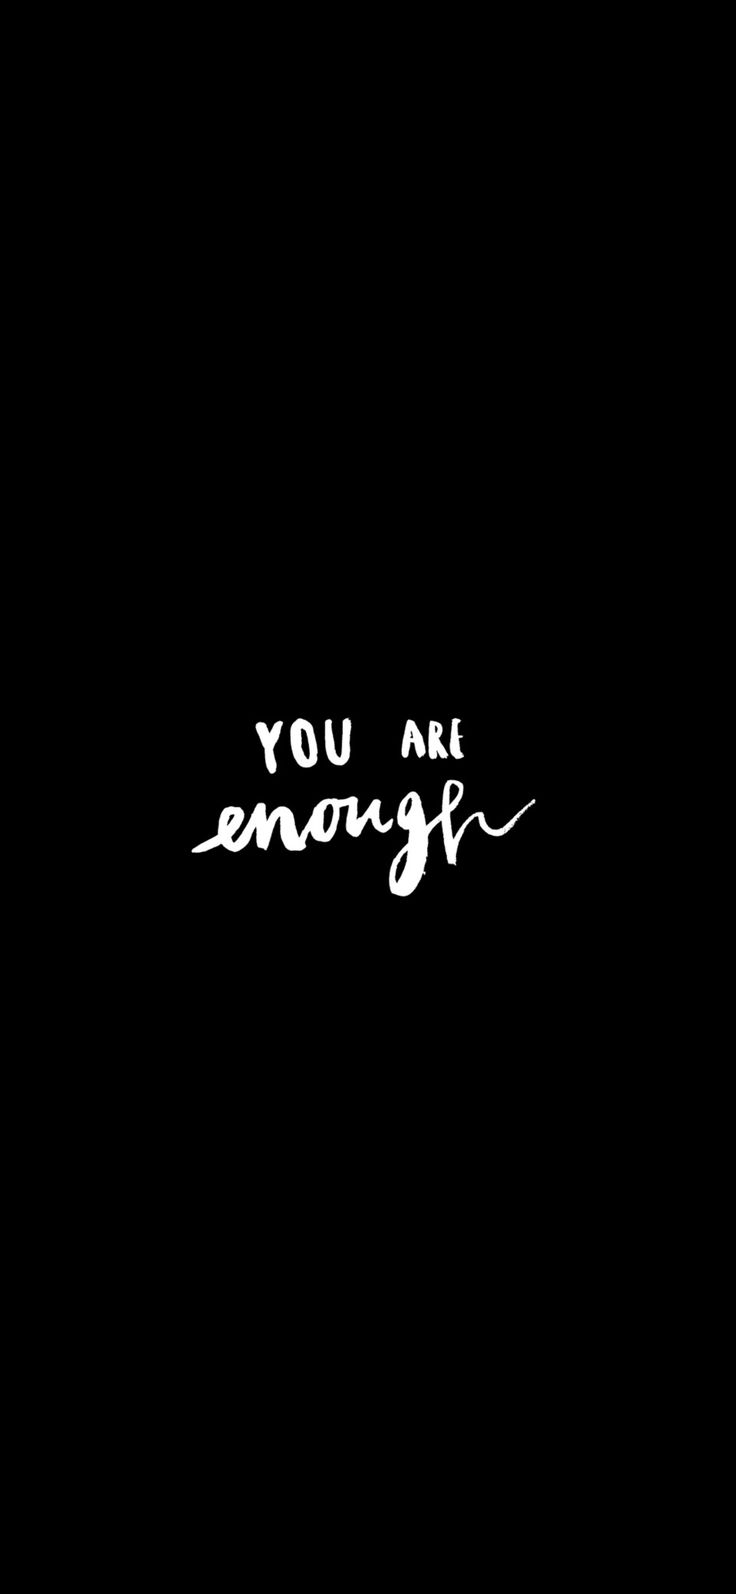 Black wallpaper. Boss up quotes, You are enough quote, You are enough